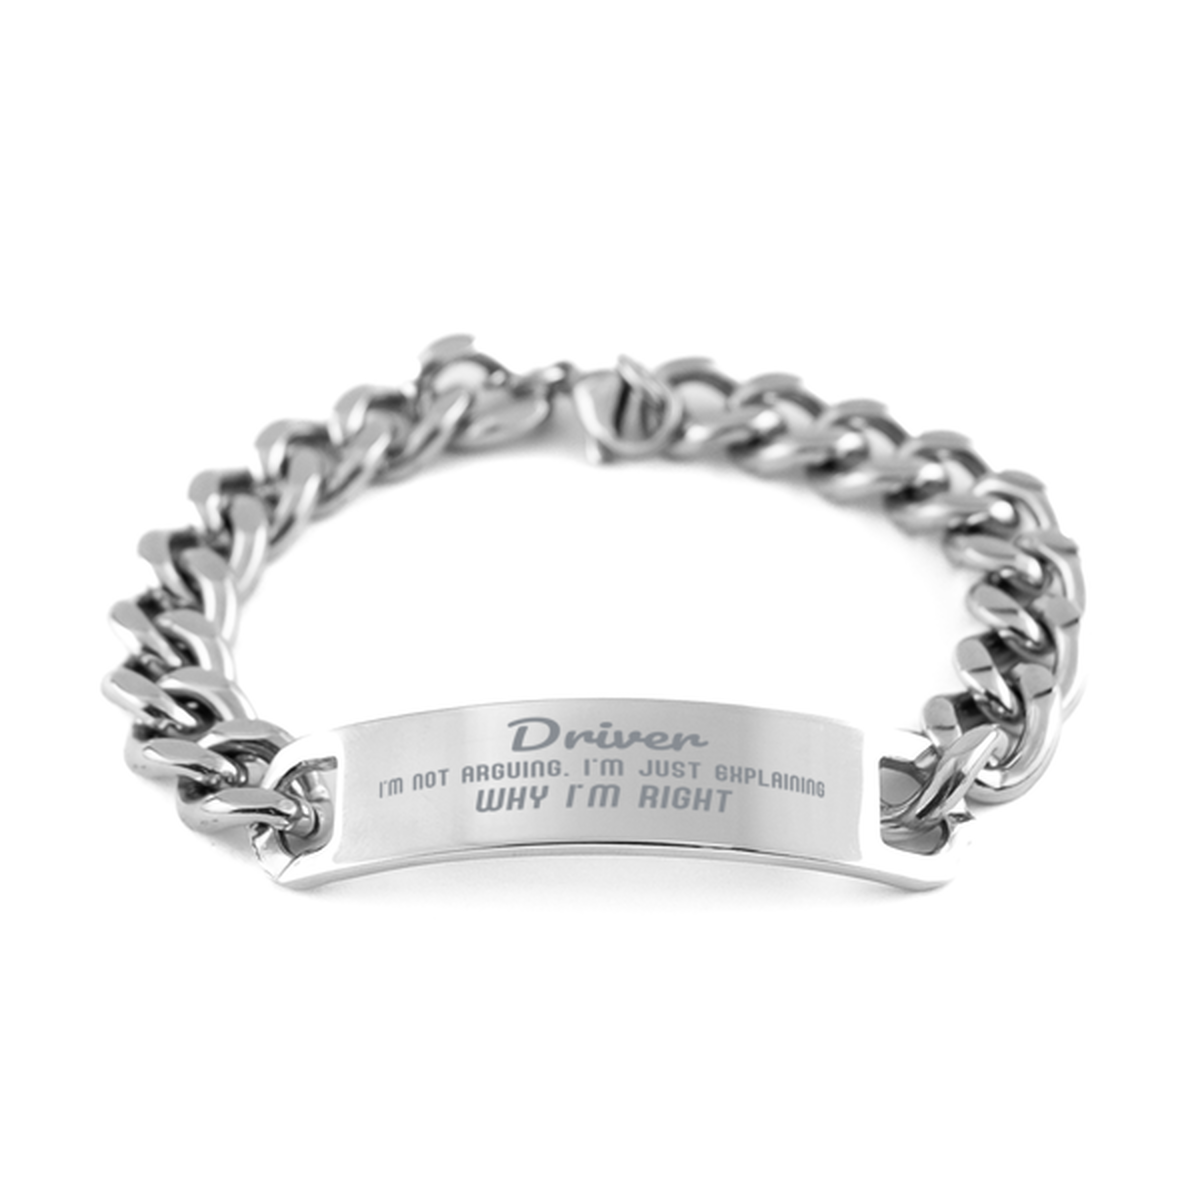 Driver I'm not Arguing. I'm Just Explaining Why I'm RIGHT Cuban Chain Stainless Steel Bracelet, Graduation Birthday Christmas Driver Gifts For Driver Funny Saying Quote Present for Men Women Coworker